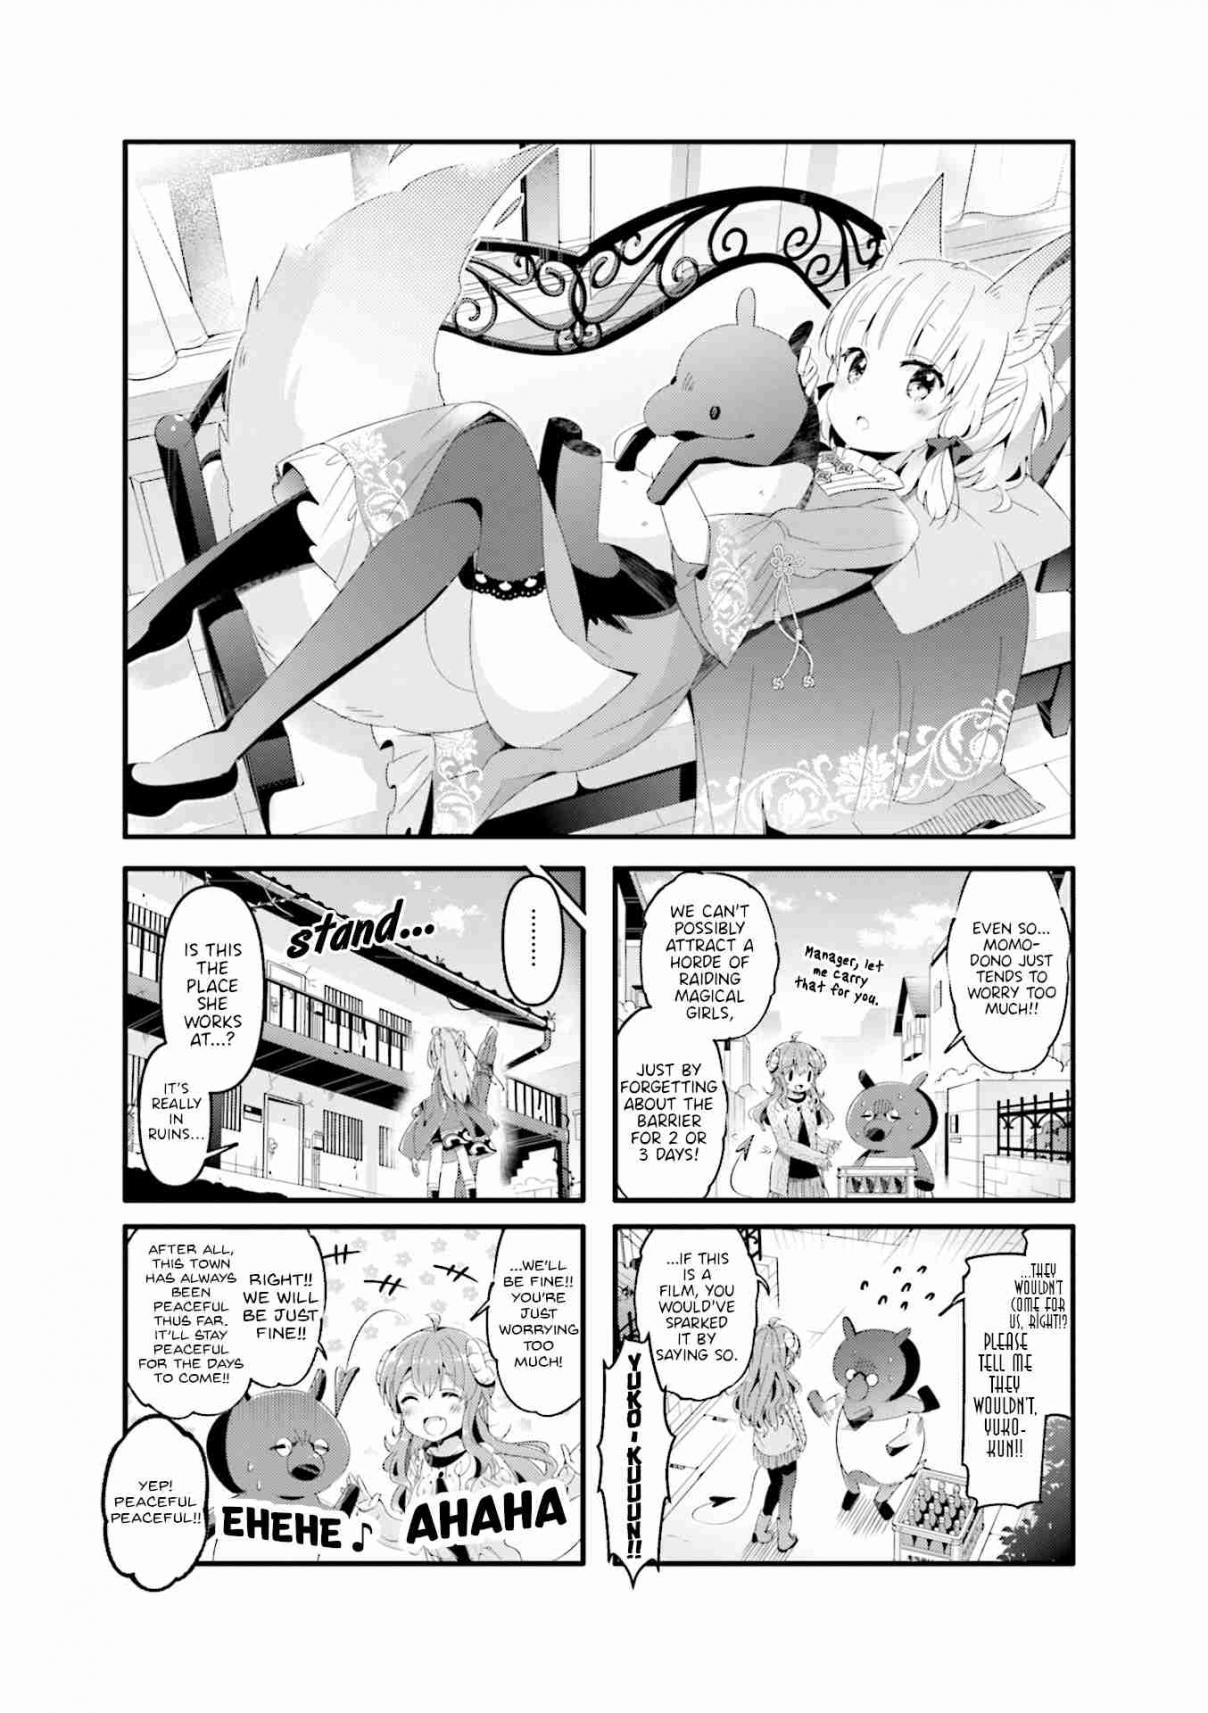 Machikado Mazoku Vol. 5 Ch. 61 The Uninvited Guest! The Ruins Styled Cafe is a Powder Keg!!